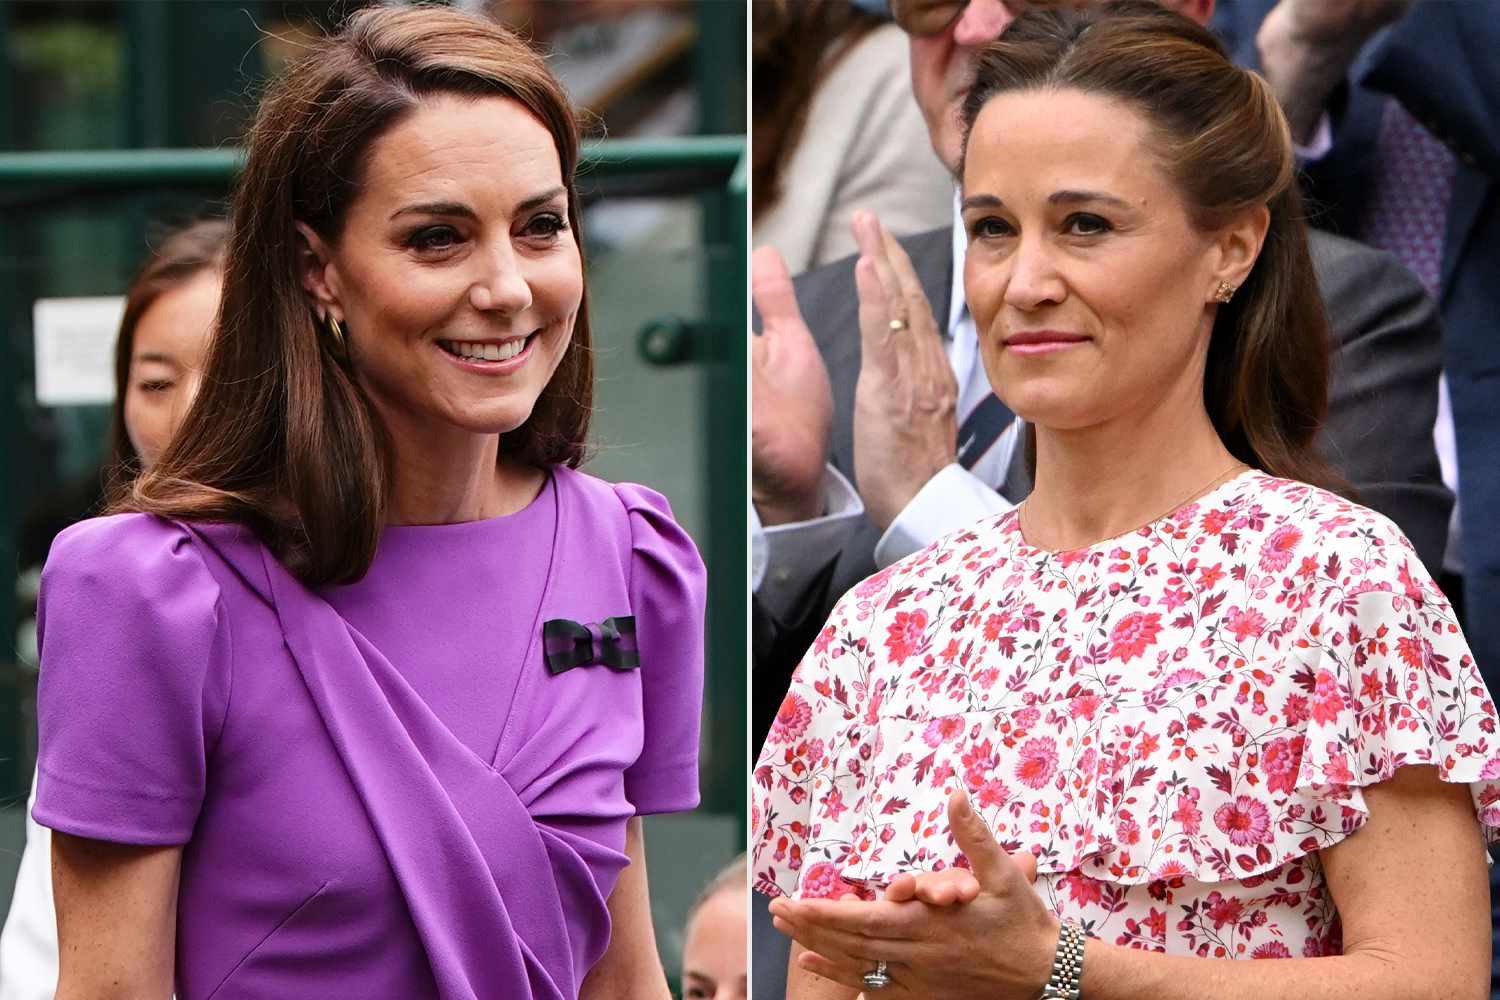 The Meaning Behind Kate Middleton and Pippa Middleton's Wimbledon Dresses